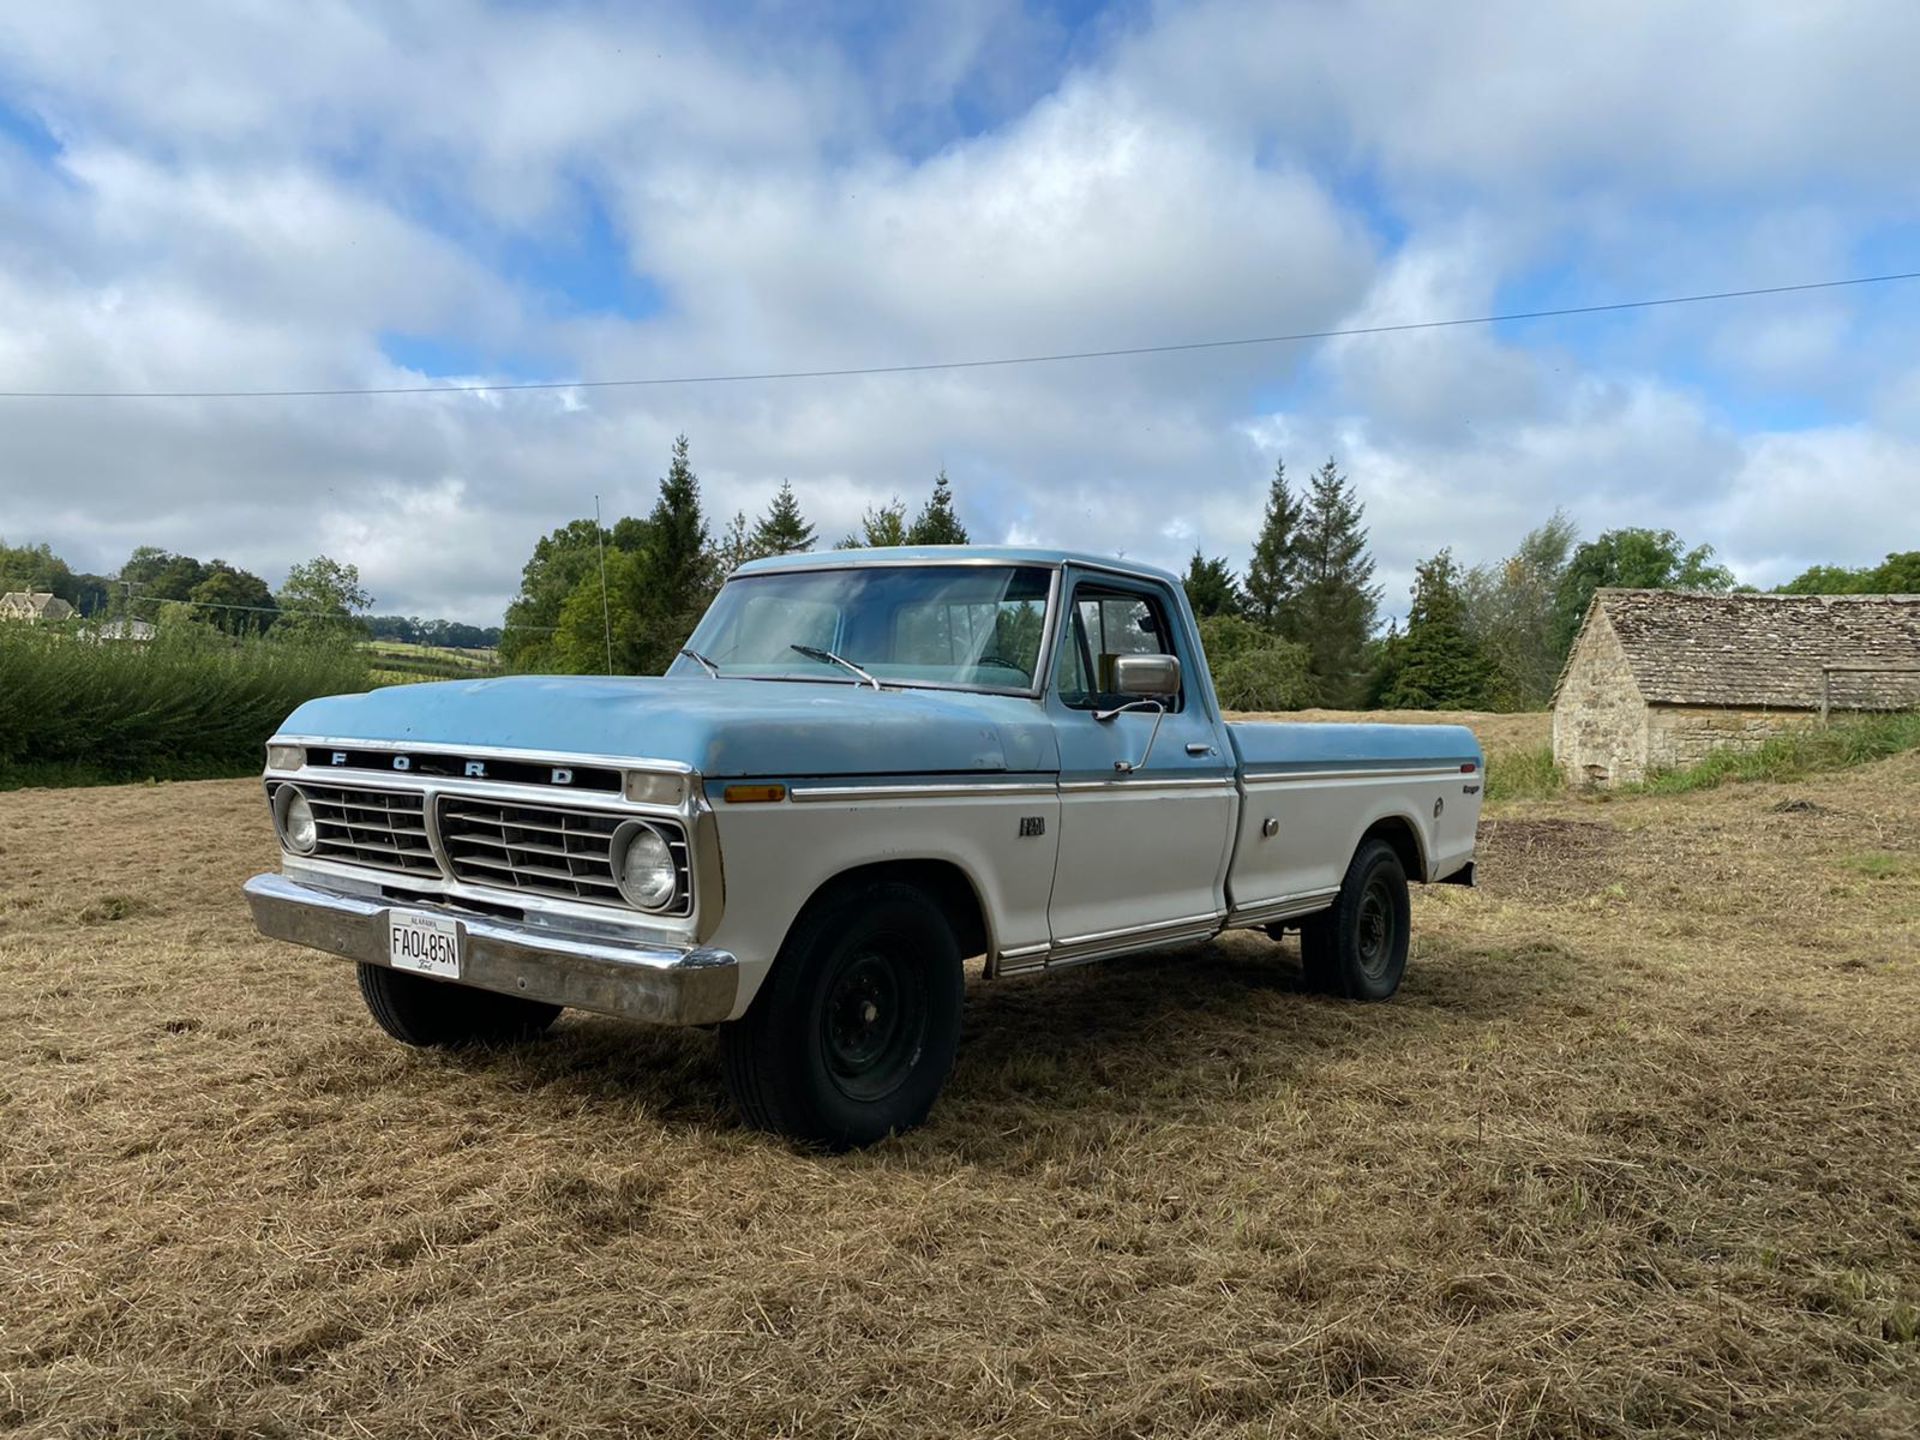 1975 FORD F-250 6.4 (390) V8, 4 SPEED MANUAL, HAS JUST BEEN REGISTERED, NEW BENCH SEAT *NO VAT* - Image 18 of 22